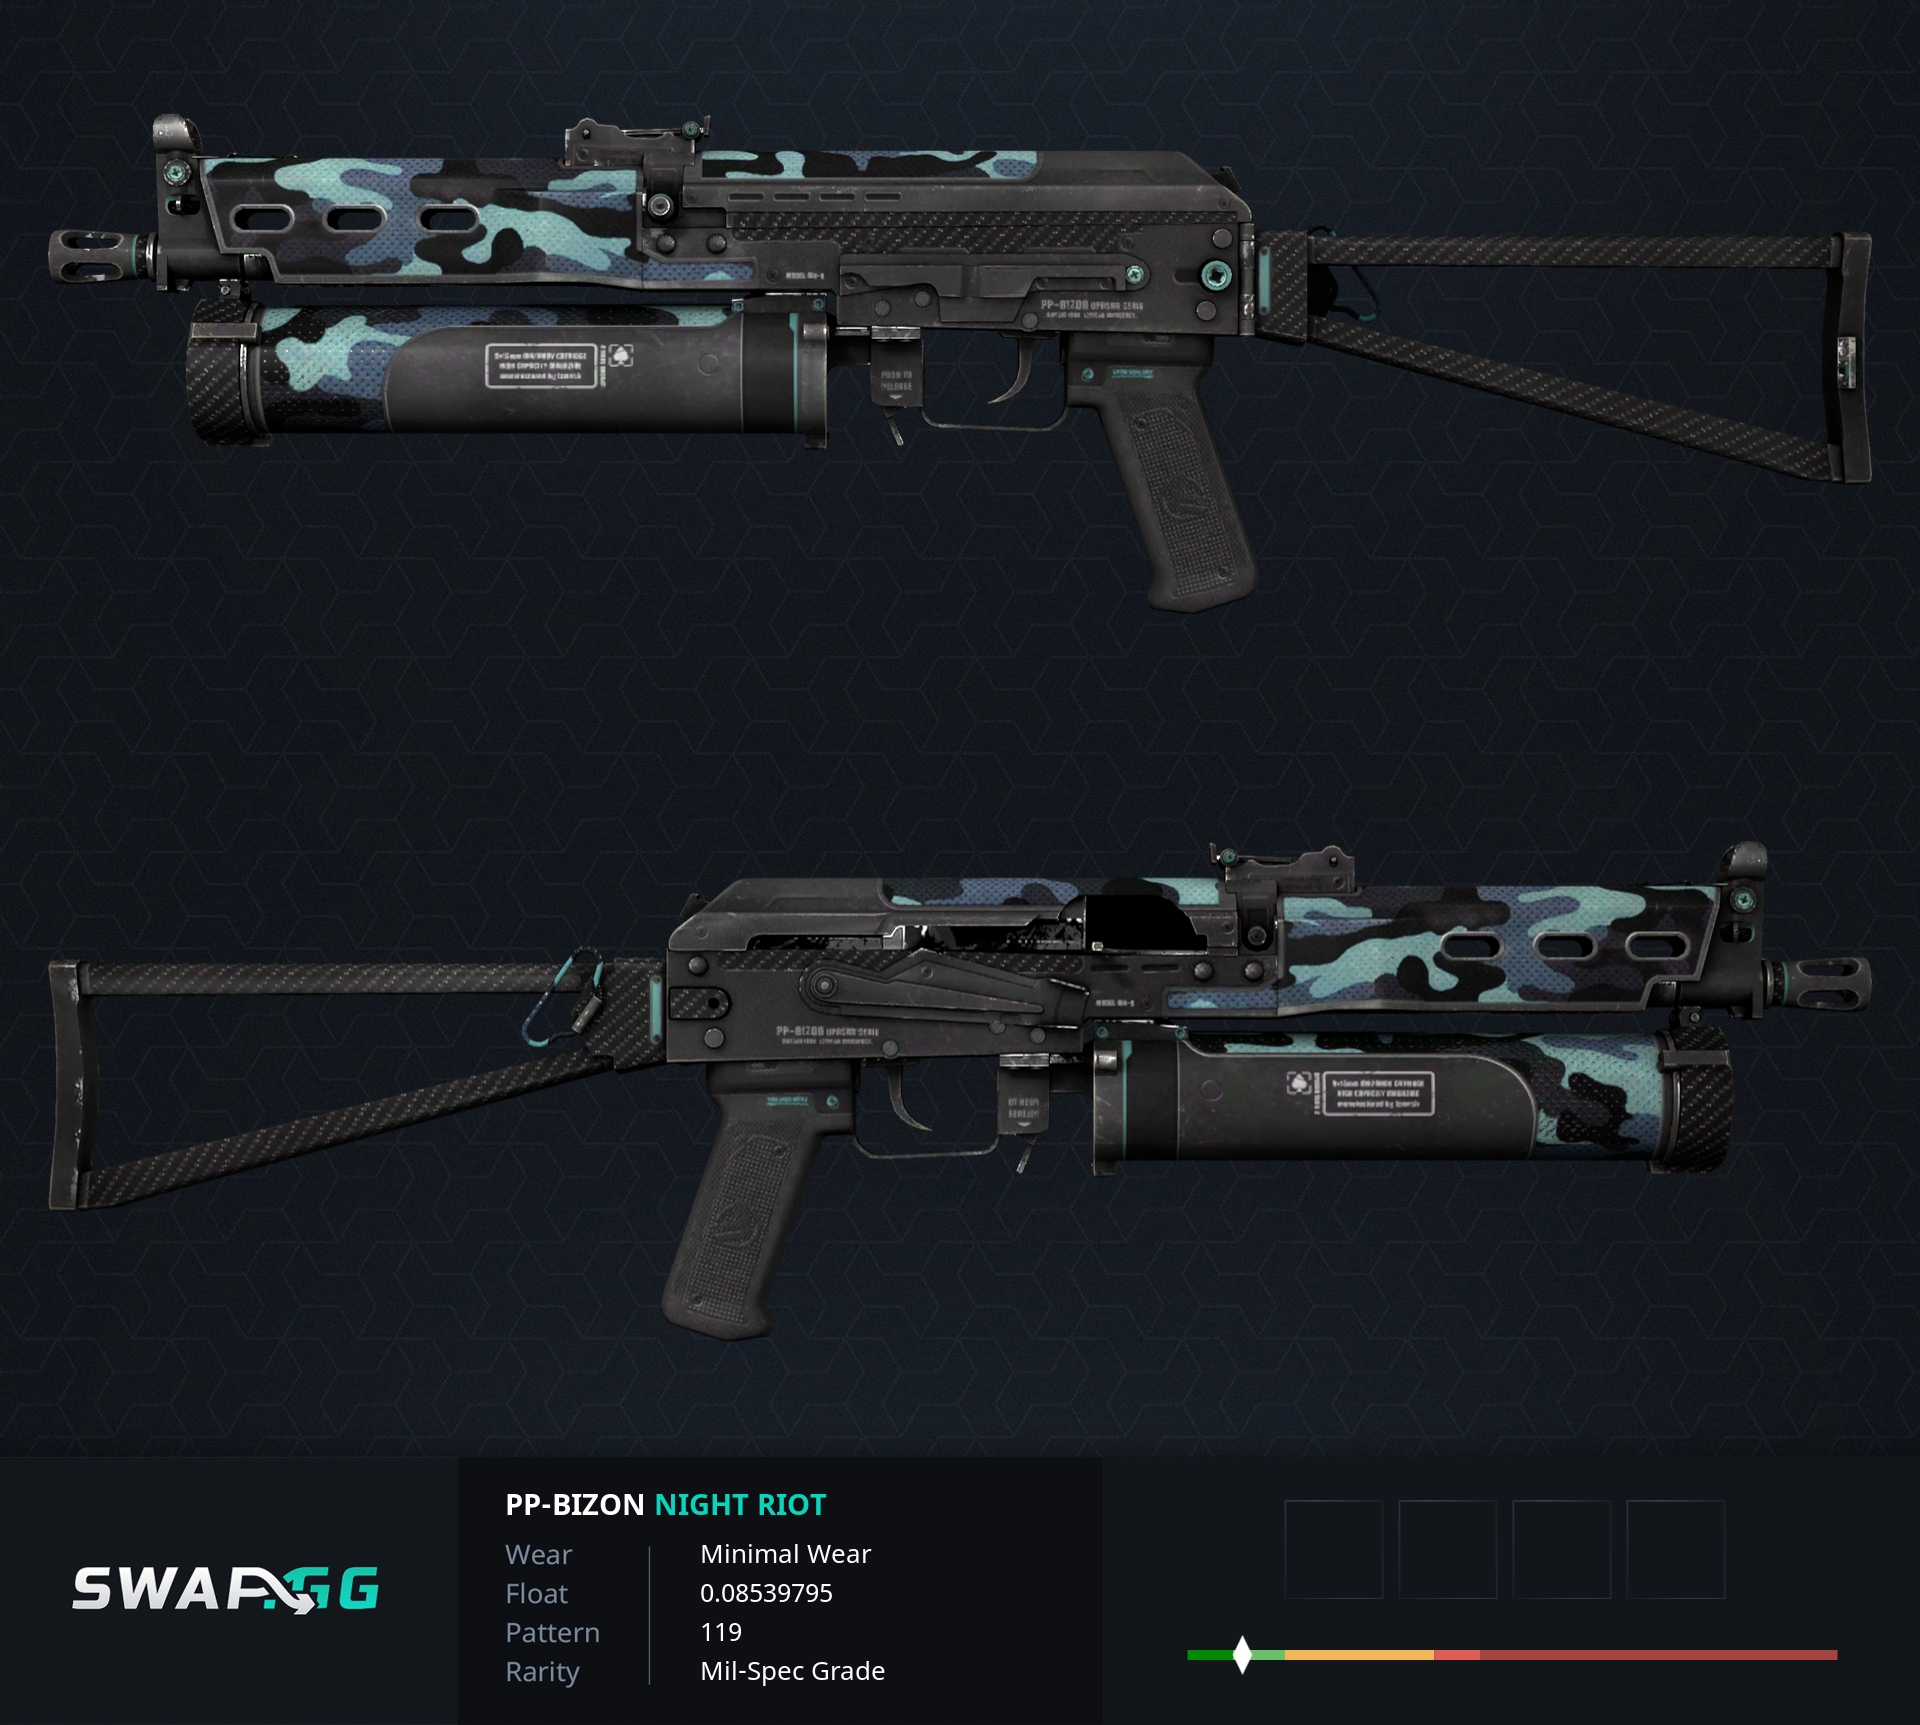 PP-Bizon Sand Dashed cs go skin instal the new version for apple